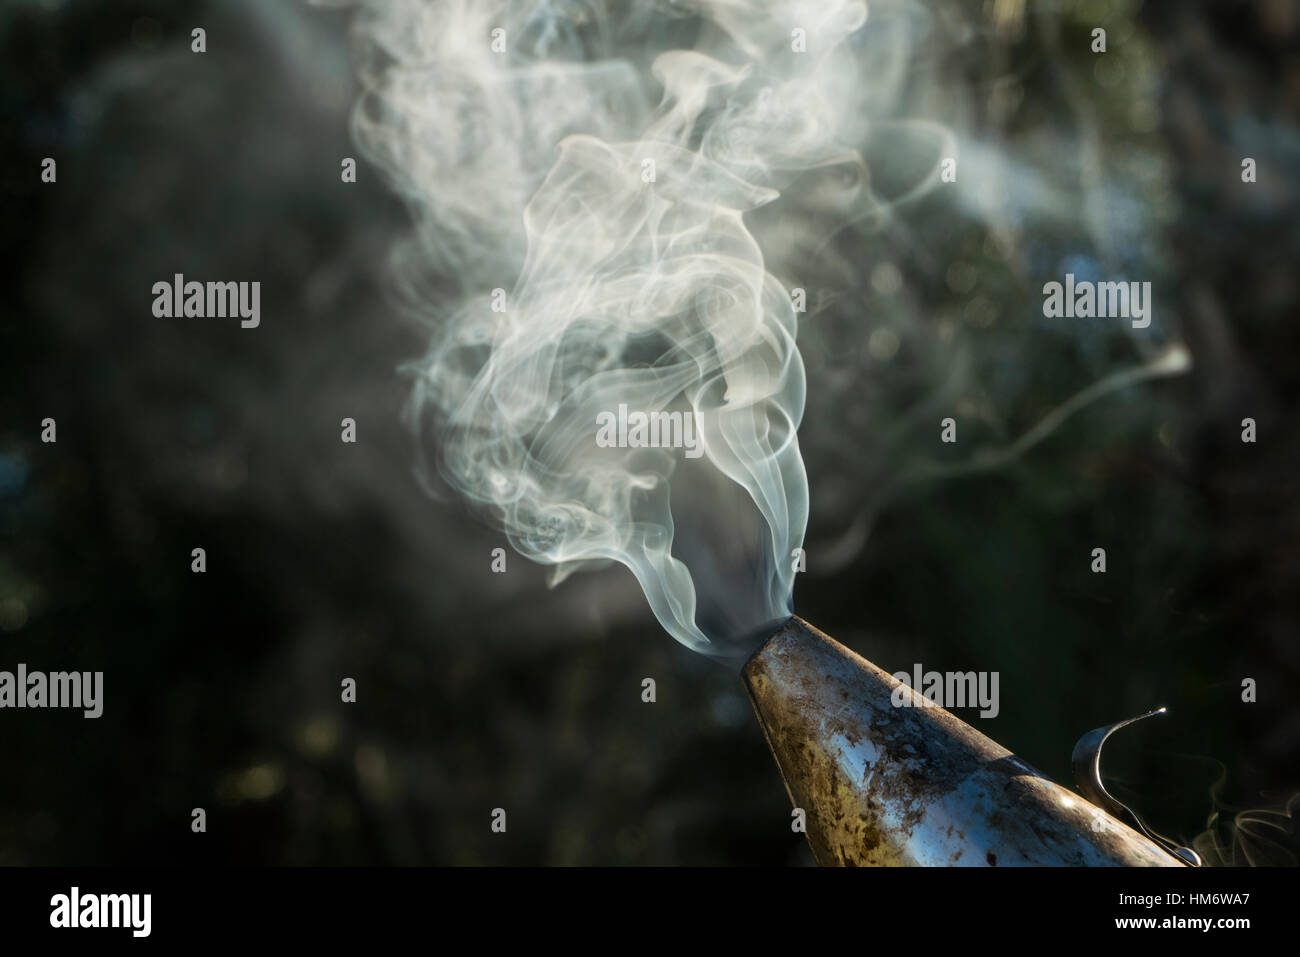 Close-up of smoke emitting from bee smoker used in apiculture Stock Photo